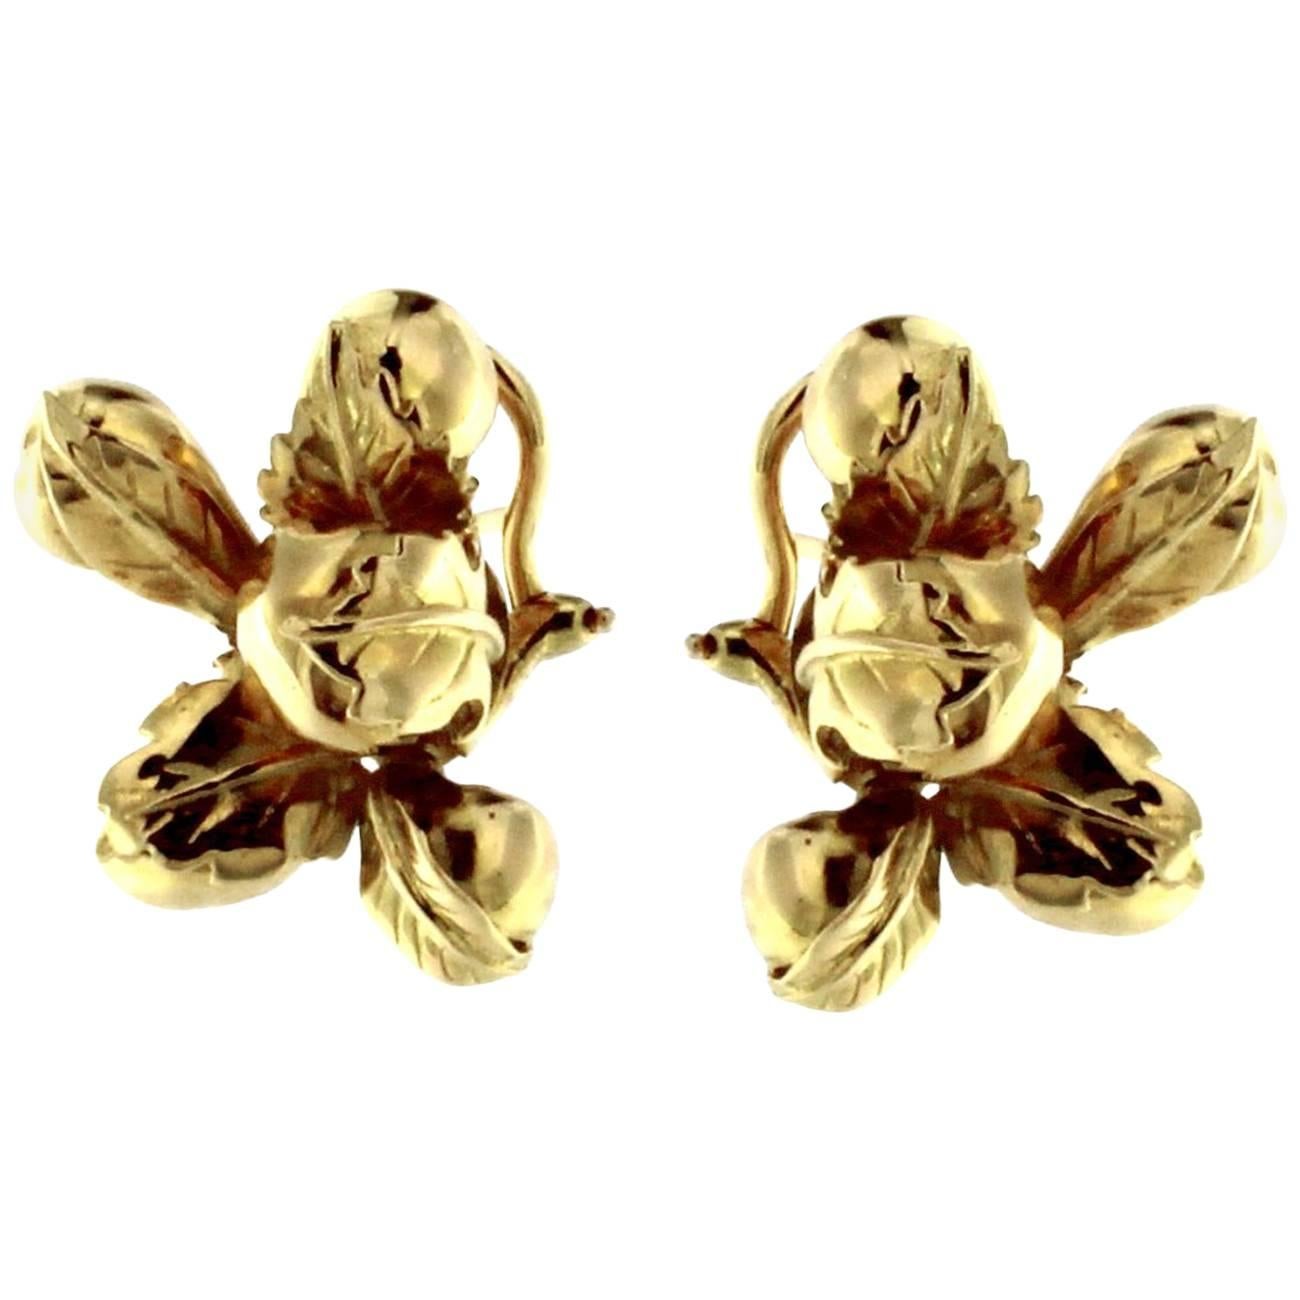 Pair of Earrings in Still Life Fruits in 18 Karat Yellow Gold